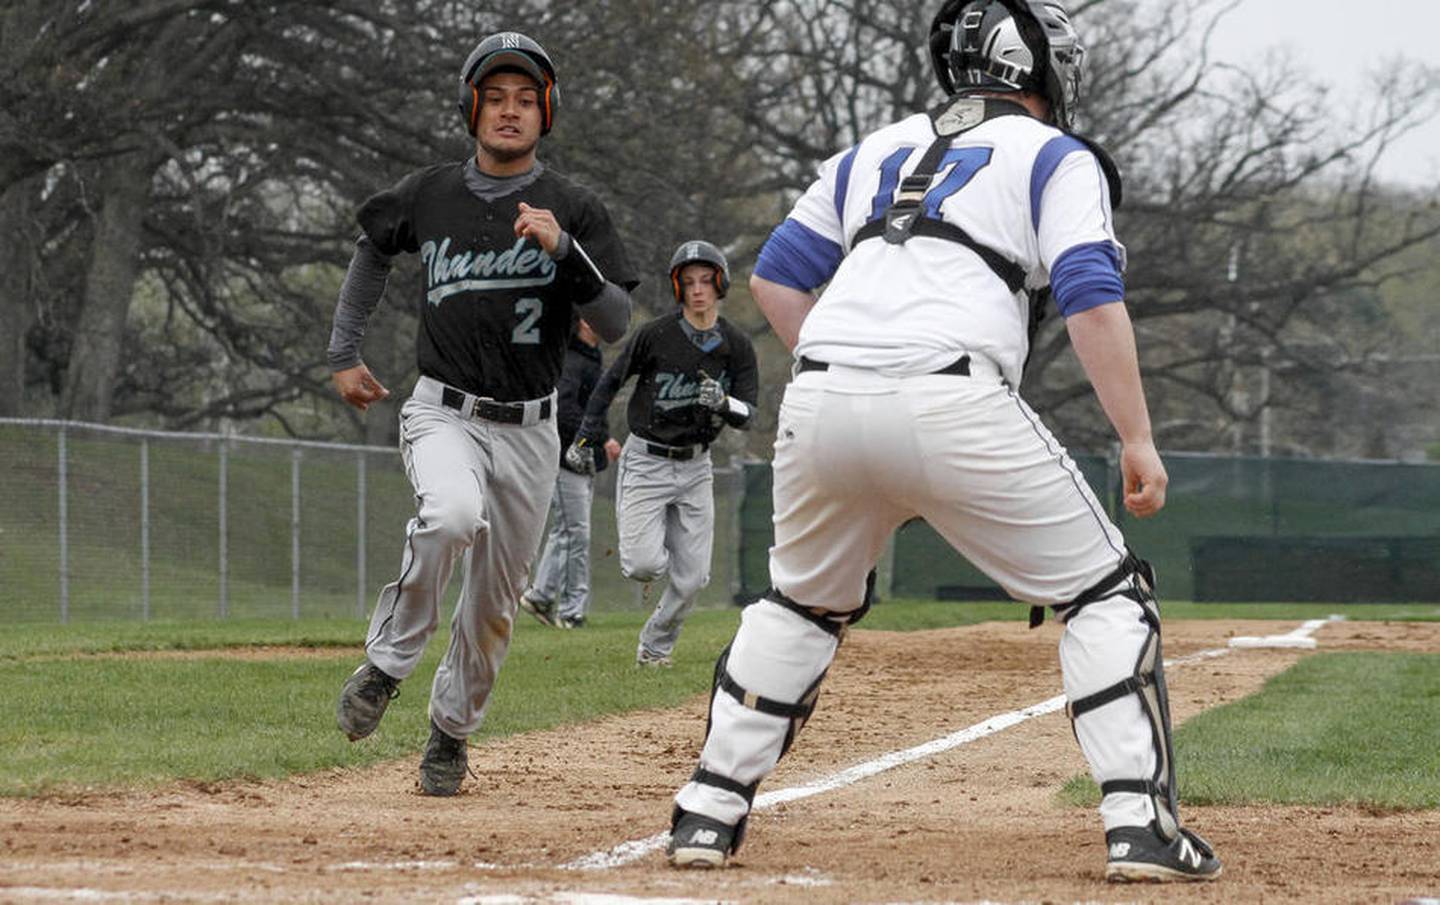 Woodstock North's Jesse Cordoba, left,  prepares to touch home plate as teammate Nate Harris follows close behind during a baseball game against Woodstock Saturday, April 30, 2016 at Emricson Park in Woodstock. Woodstock North defeated Woodstock 15-7.